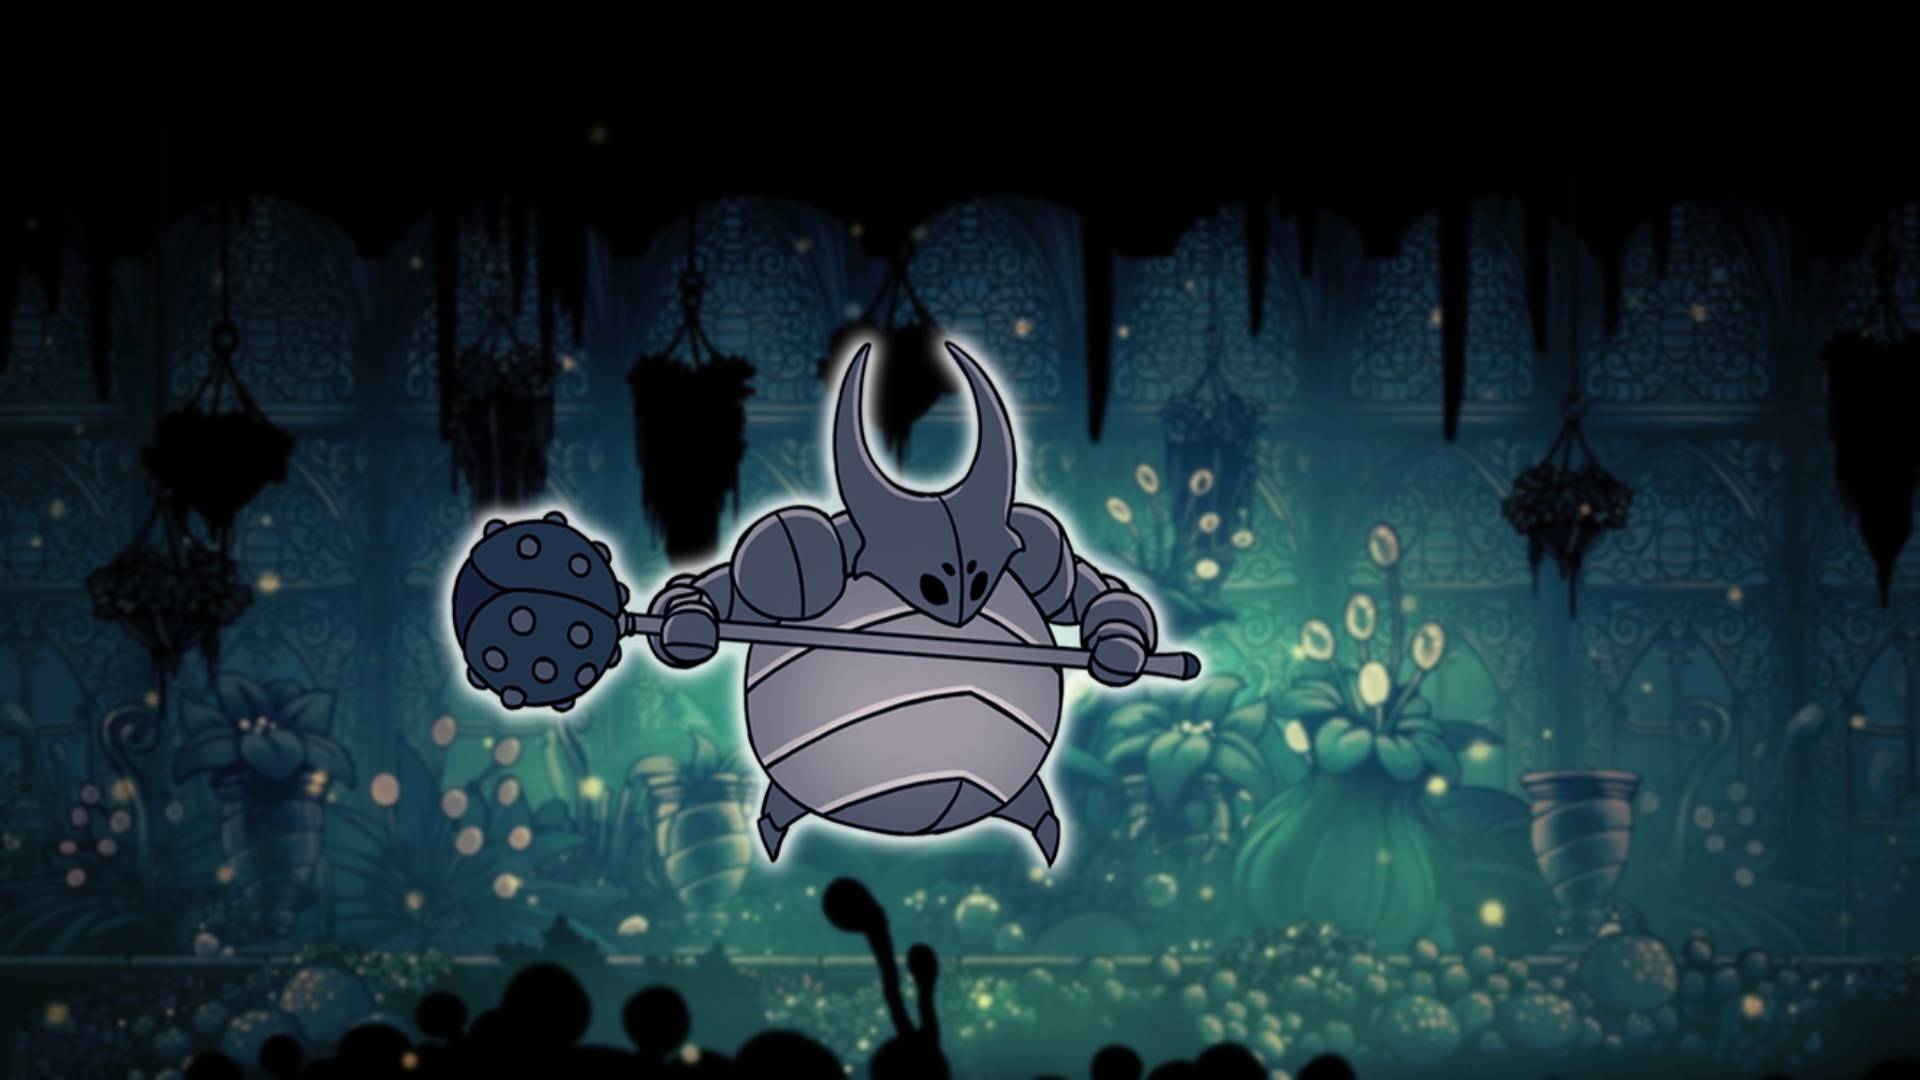 False Knight- the Hollow Knight boss, is visible against a mossy green background area from Hollow Knight